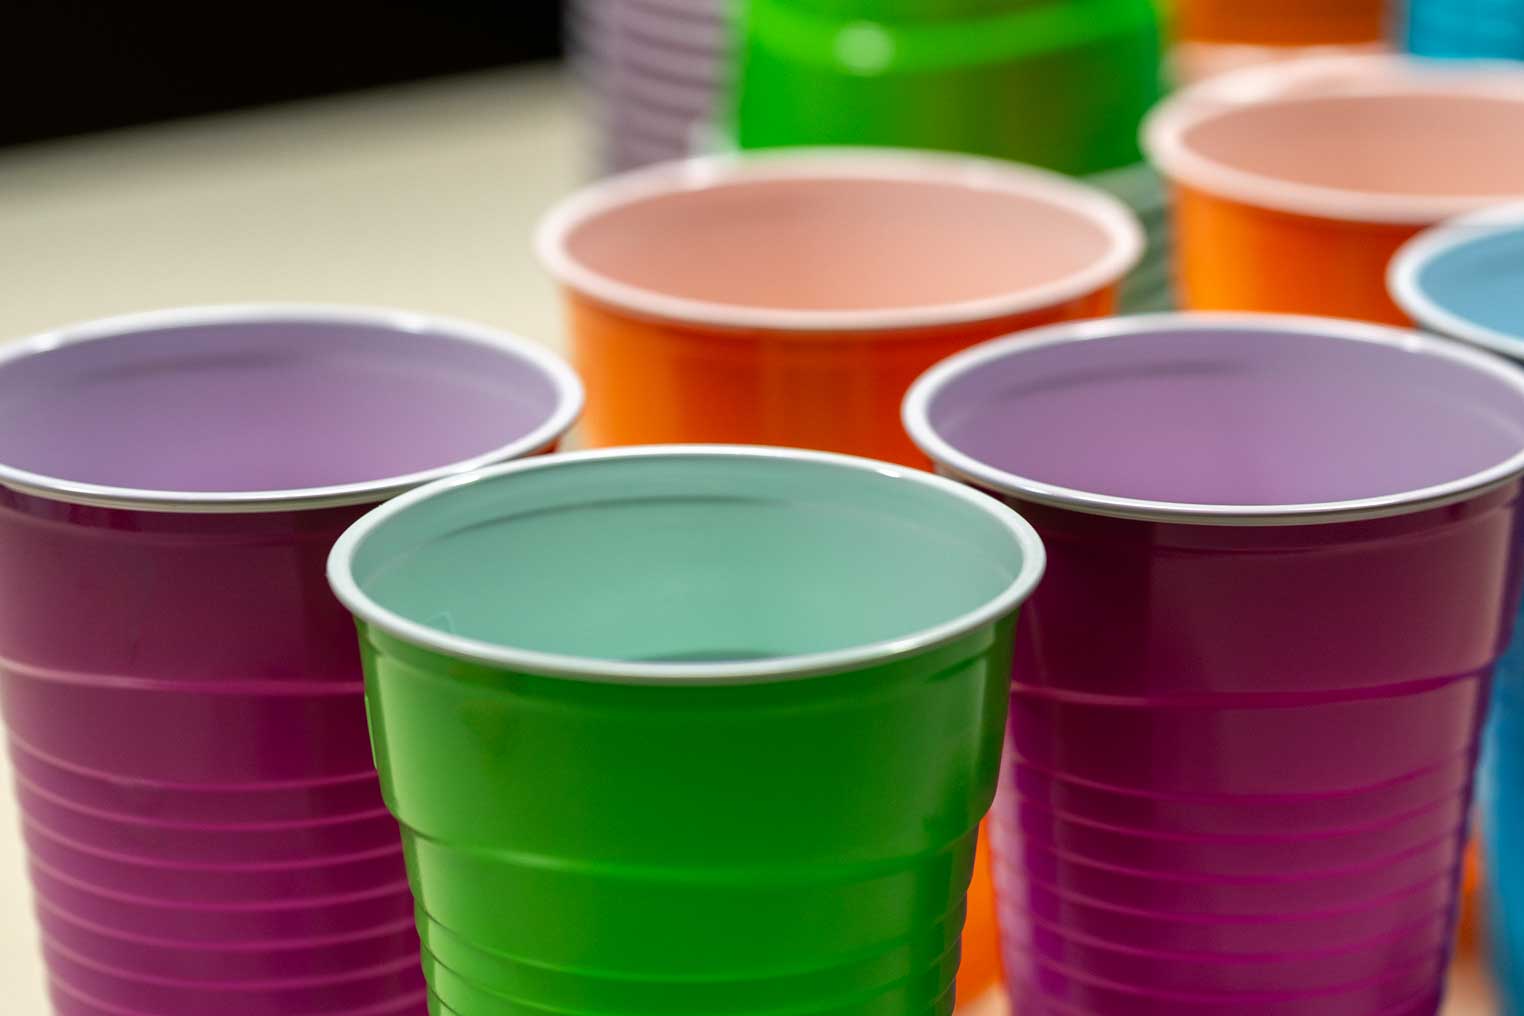 cups on a table